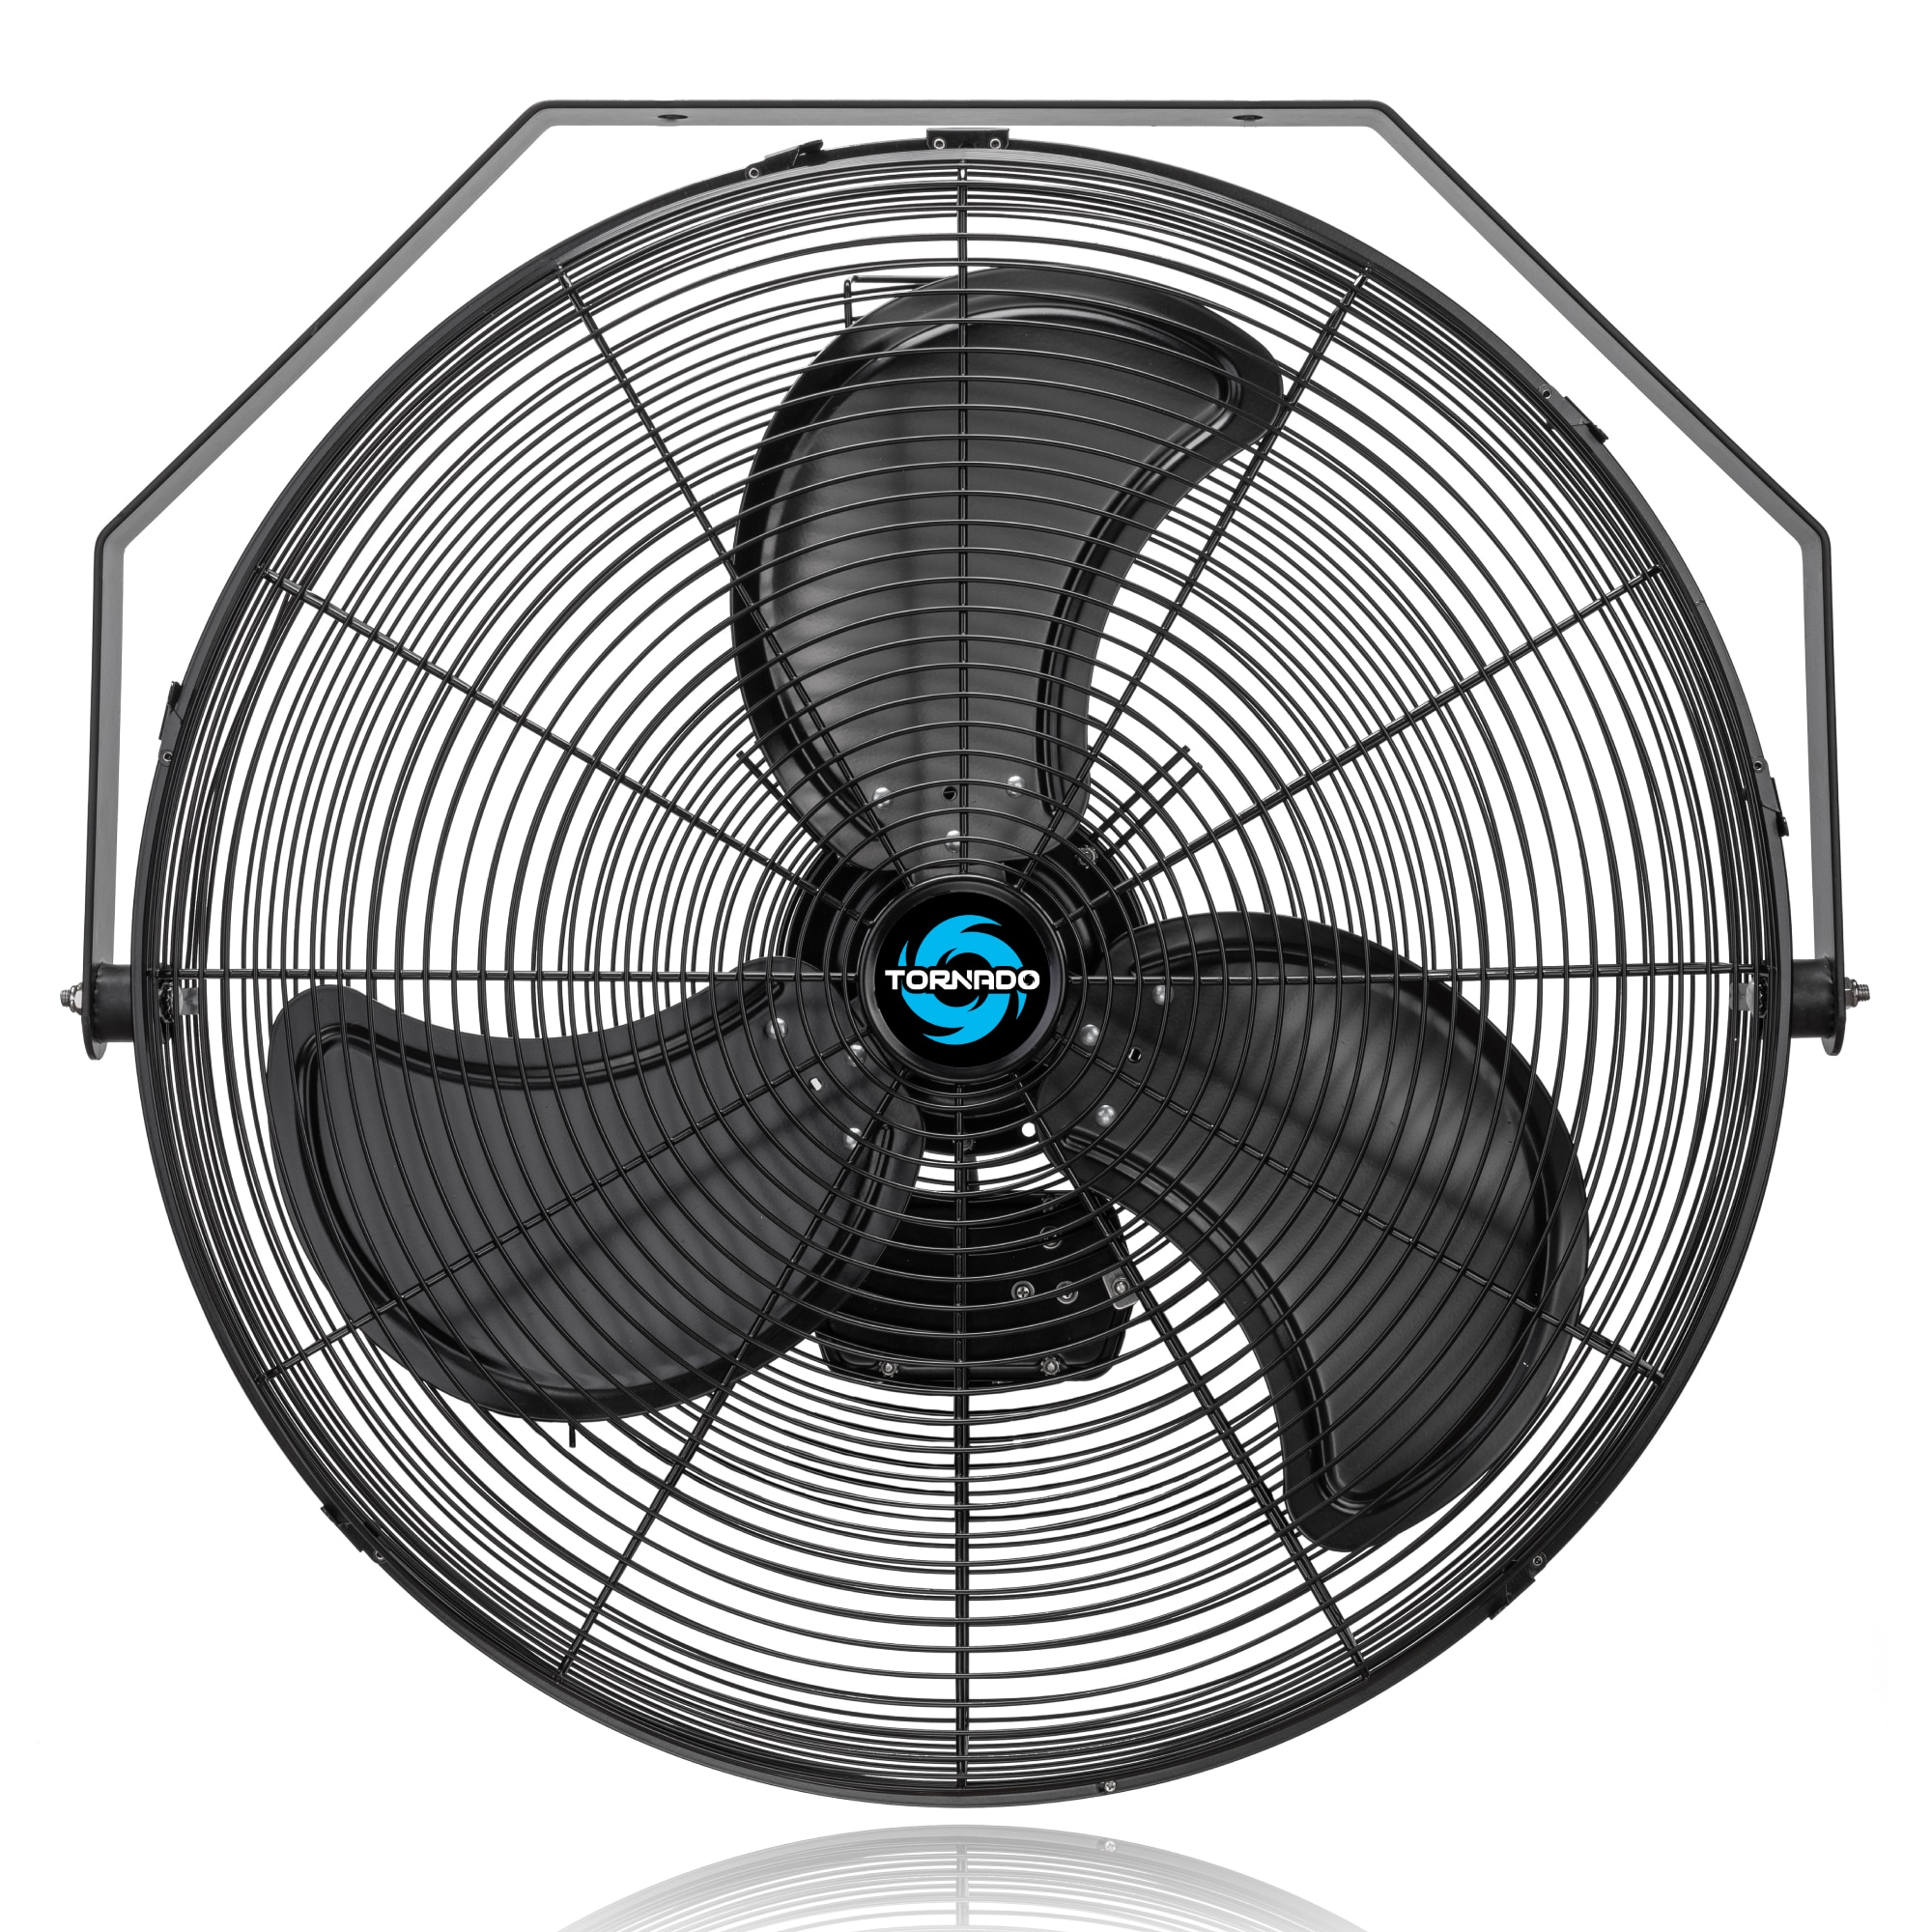 NewAir 20 in. Outdoor Rated High Velocity Wall Mounted Fan with 3